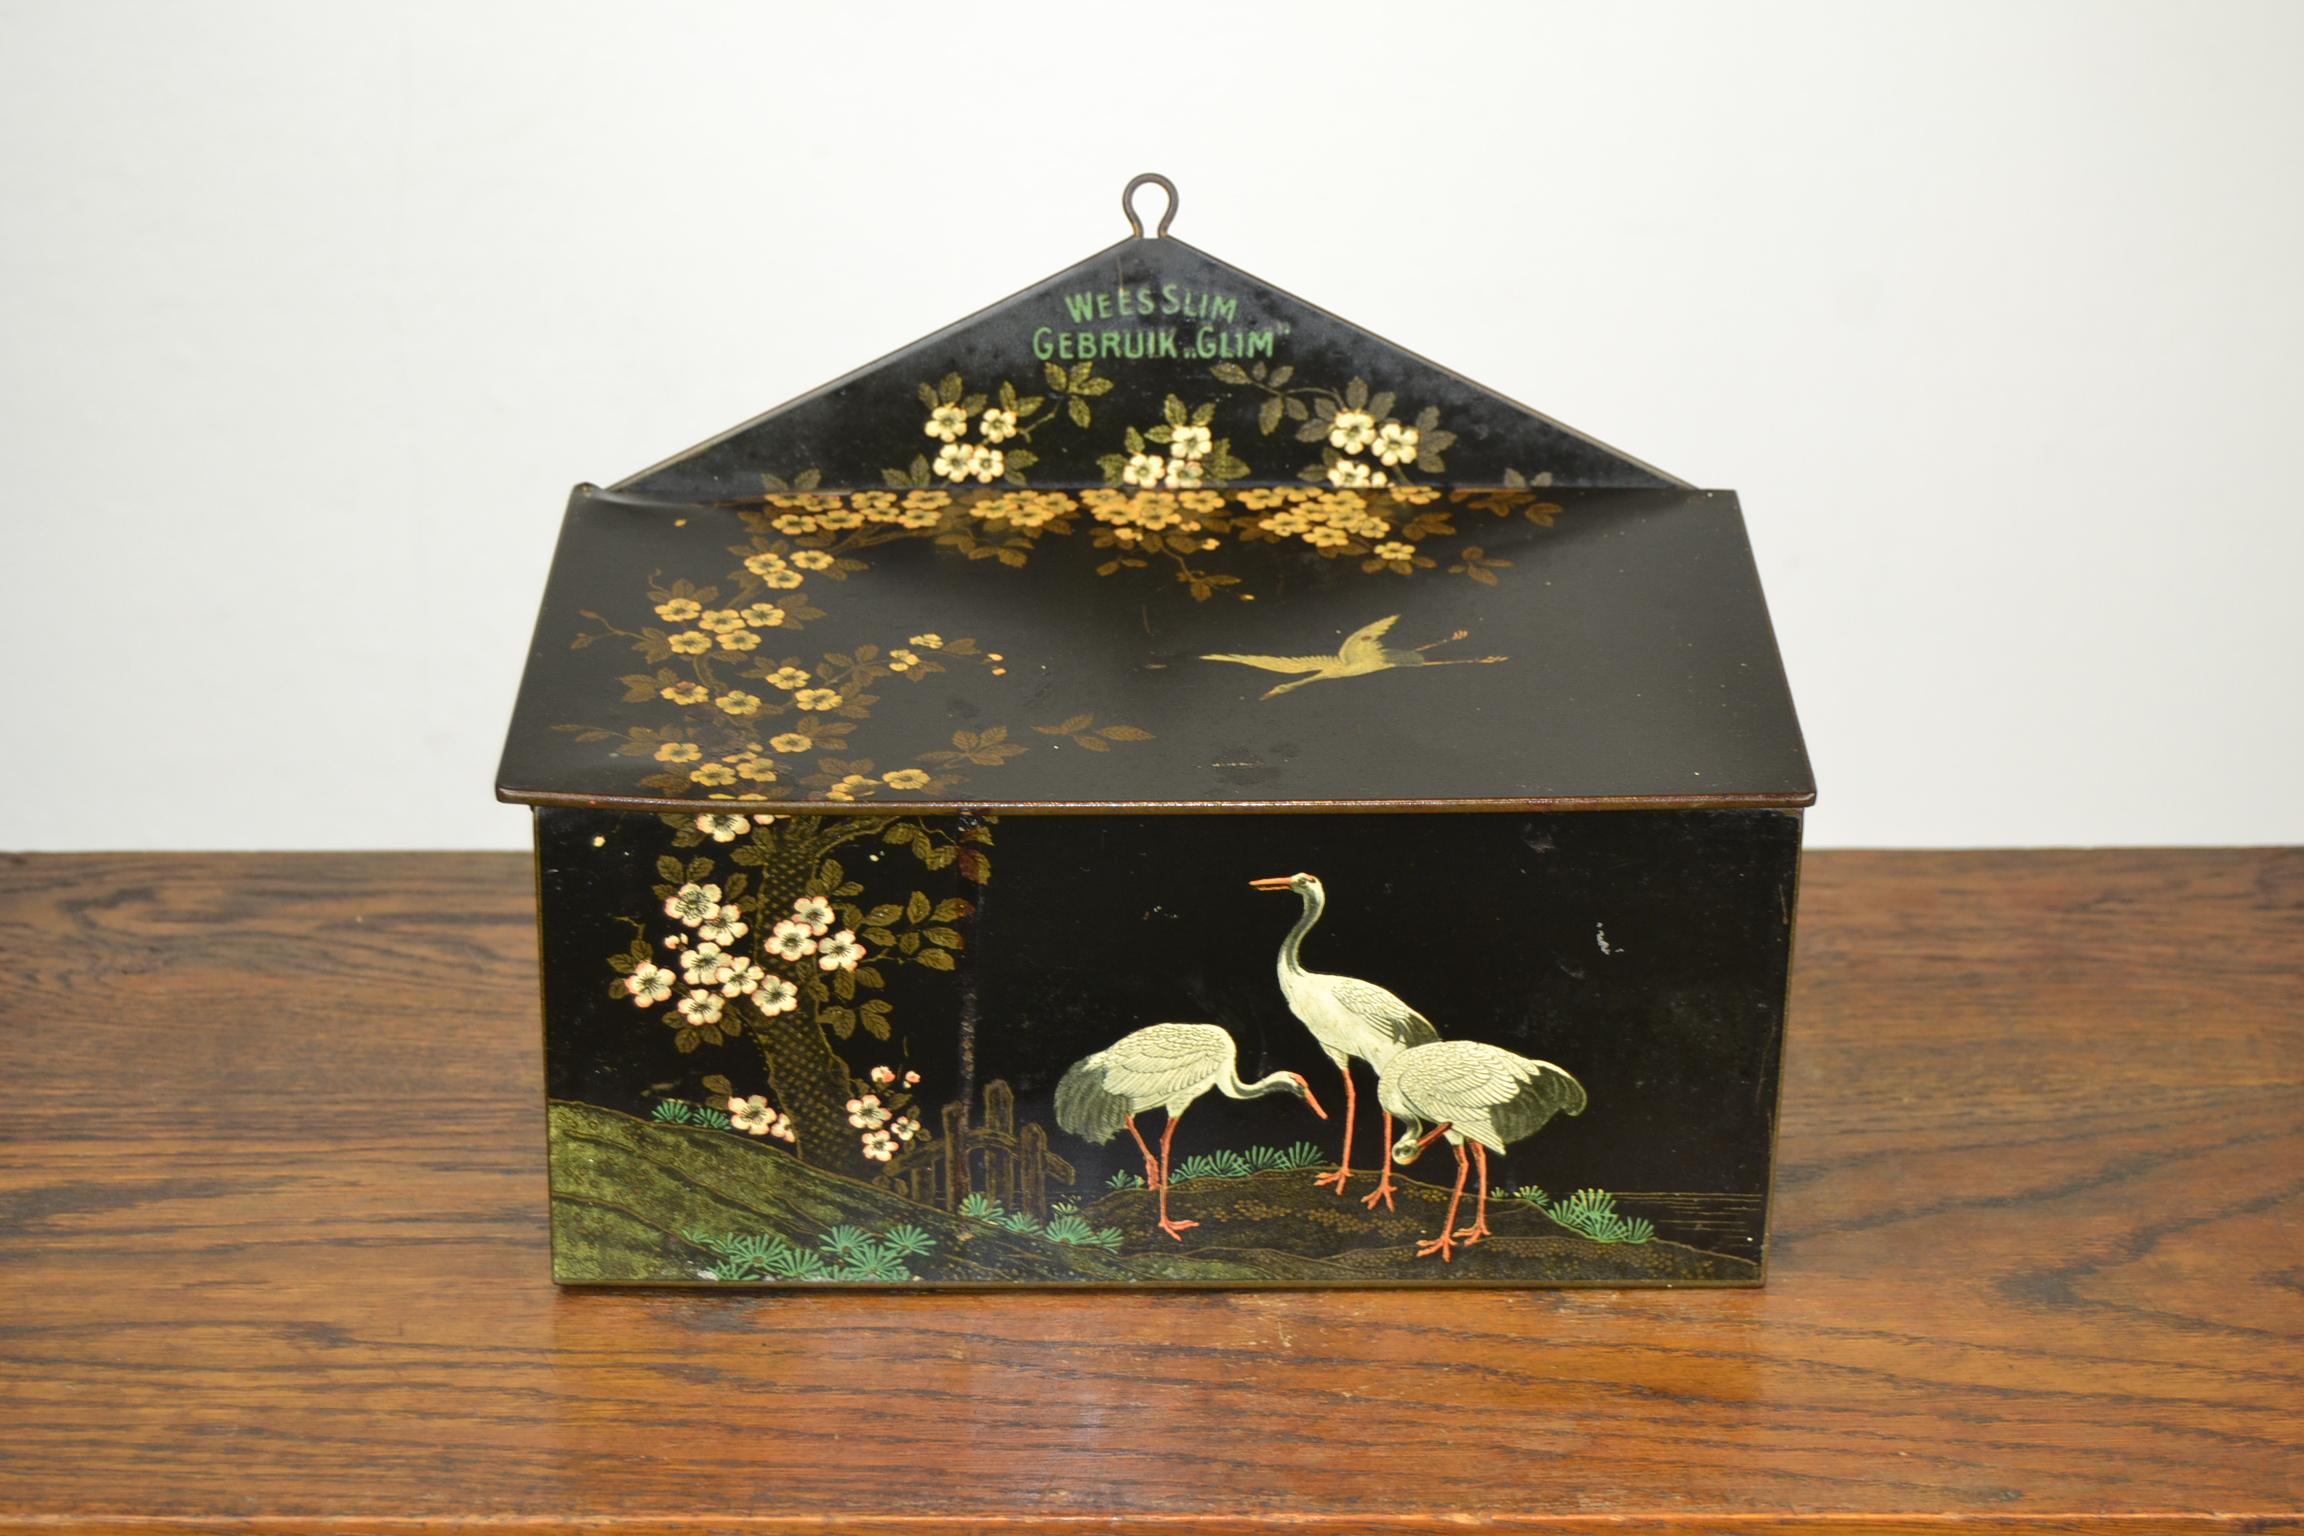 Black Art Deco tin with crane birds and flowers in Asian style.
This Art Deco storage tin with cranes dates from the early 1930s and was made by the Dutch Company Bekkers Dordrecht Holland. 
It was designed to storage cleaning and polishing